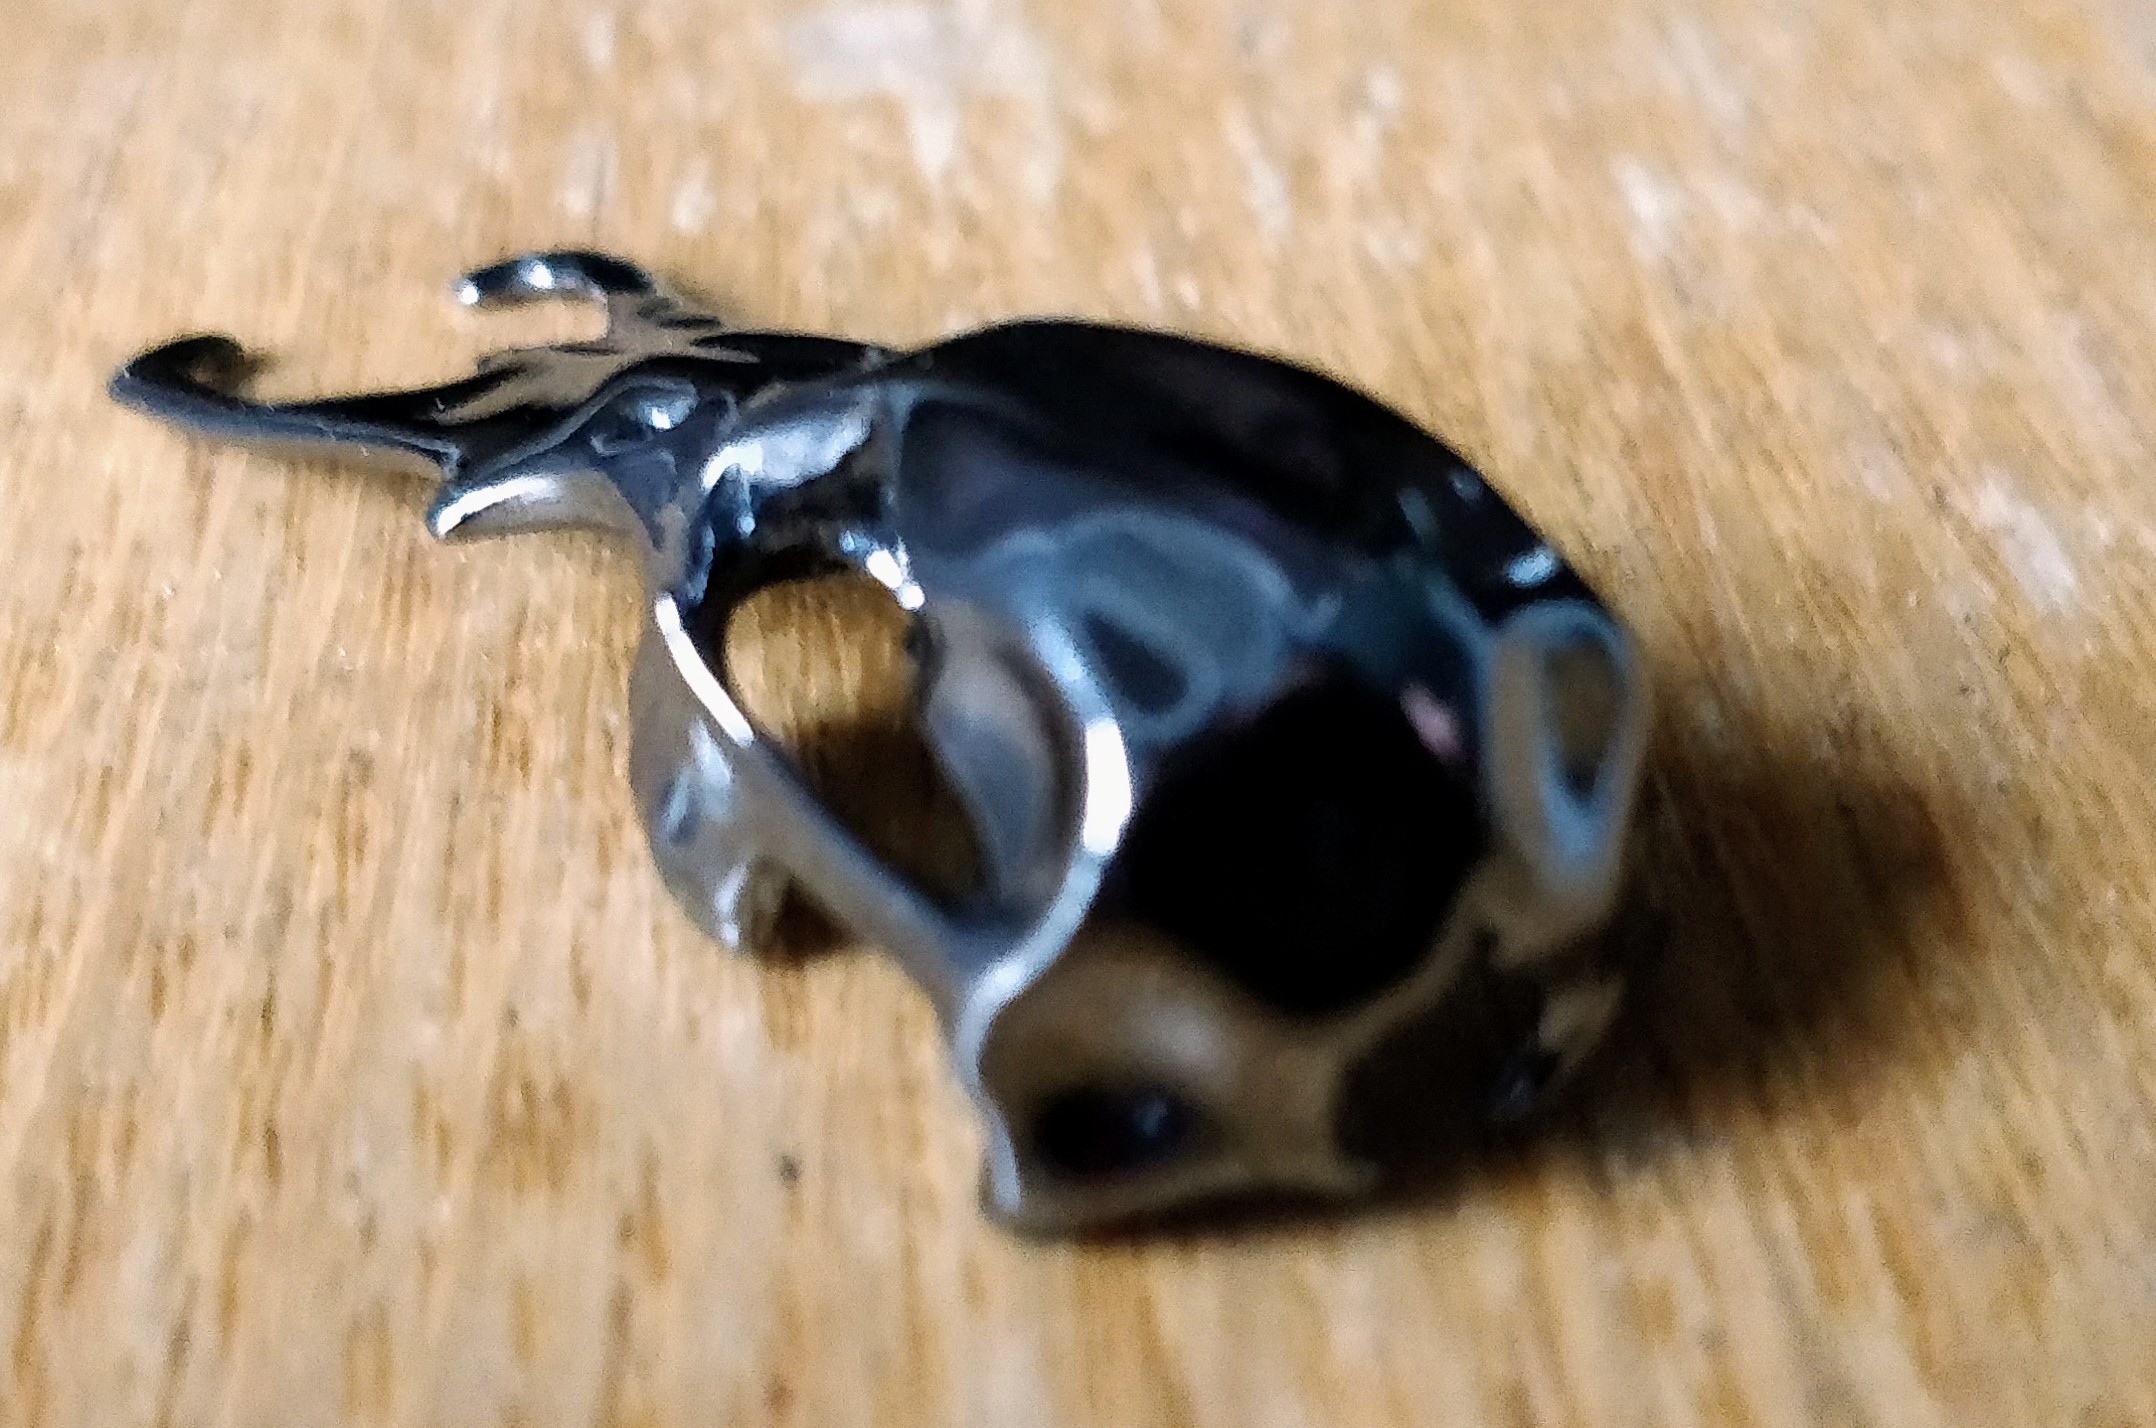 Completed platypus skull 3D model with a black brass finish